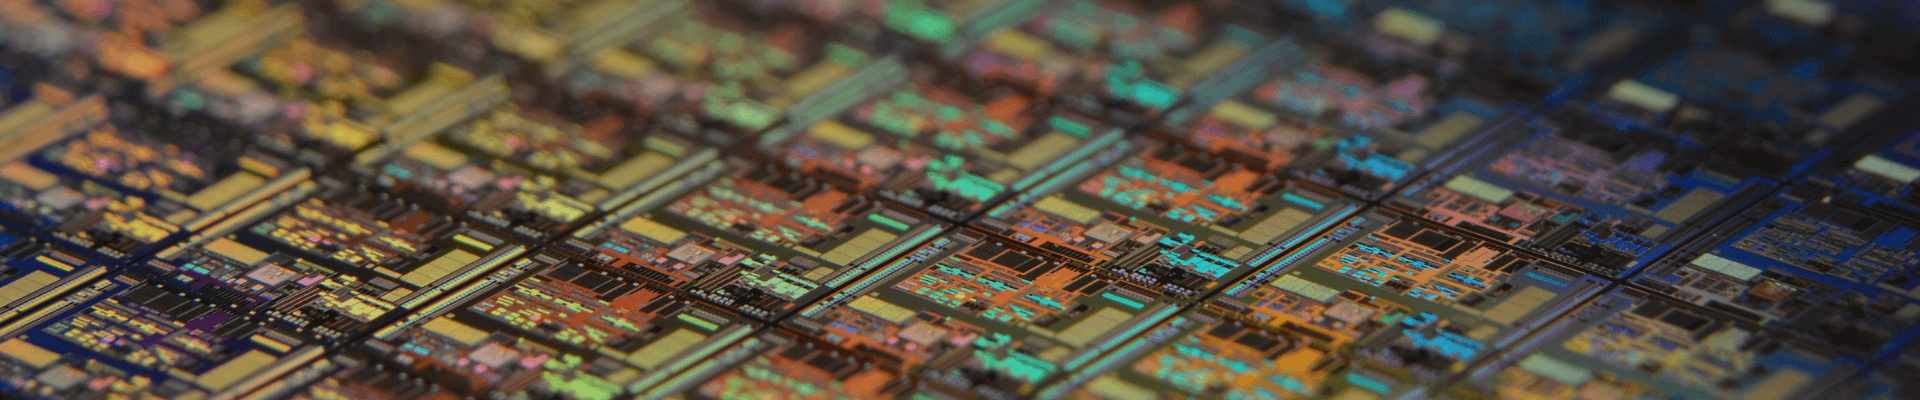 Looking at the GlobalFoundries v. TSMC Case